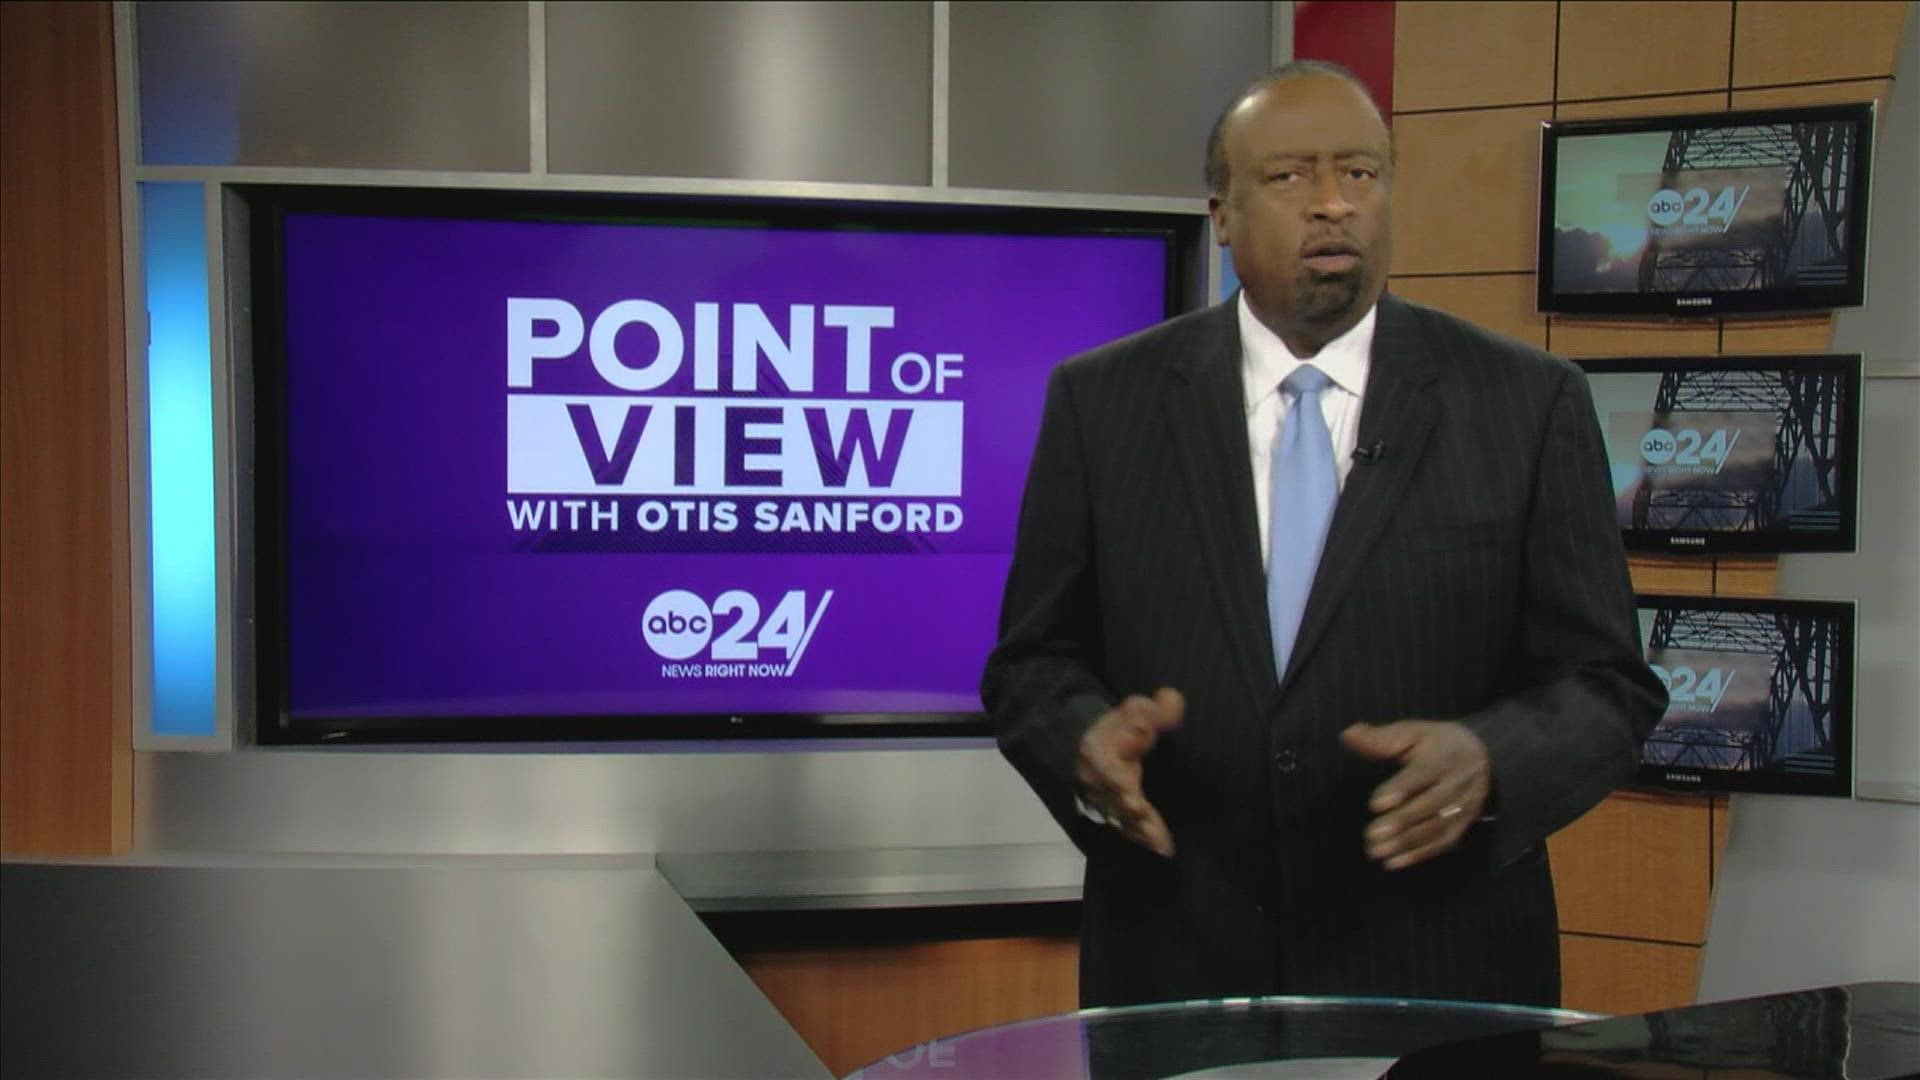 ABC 24 political analyst and commentator Otis Sanford shared his point of view on GOP censures of some Republicans.